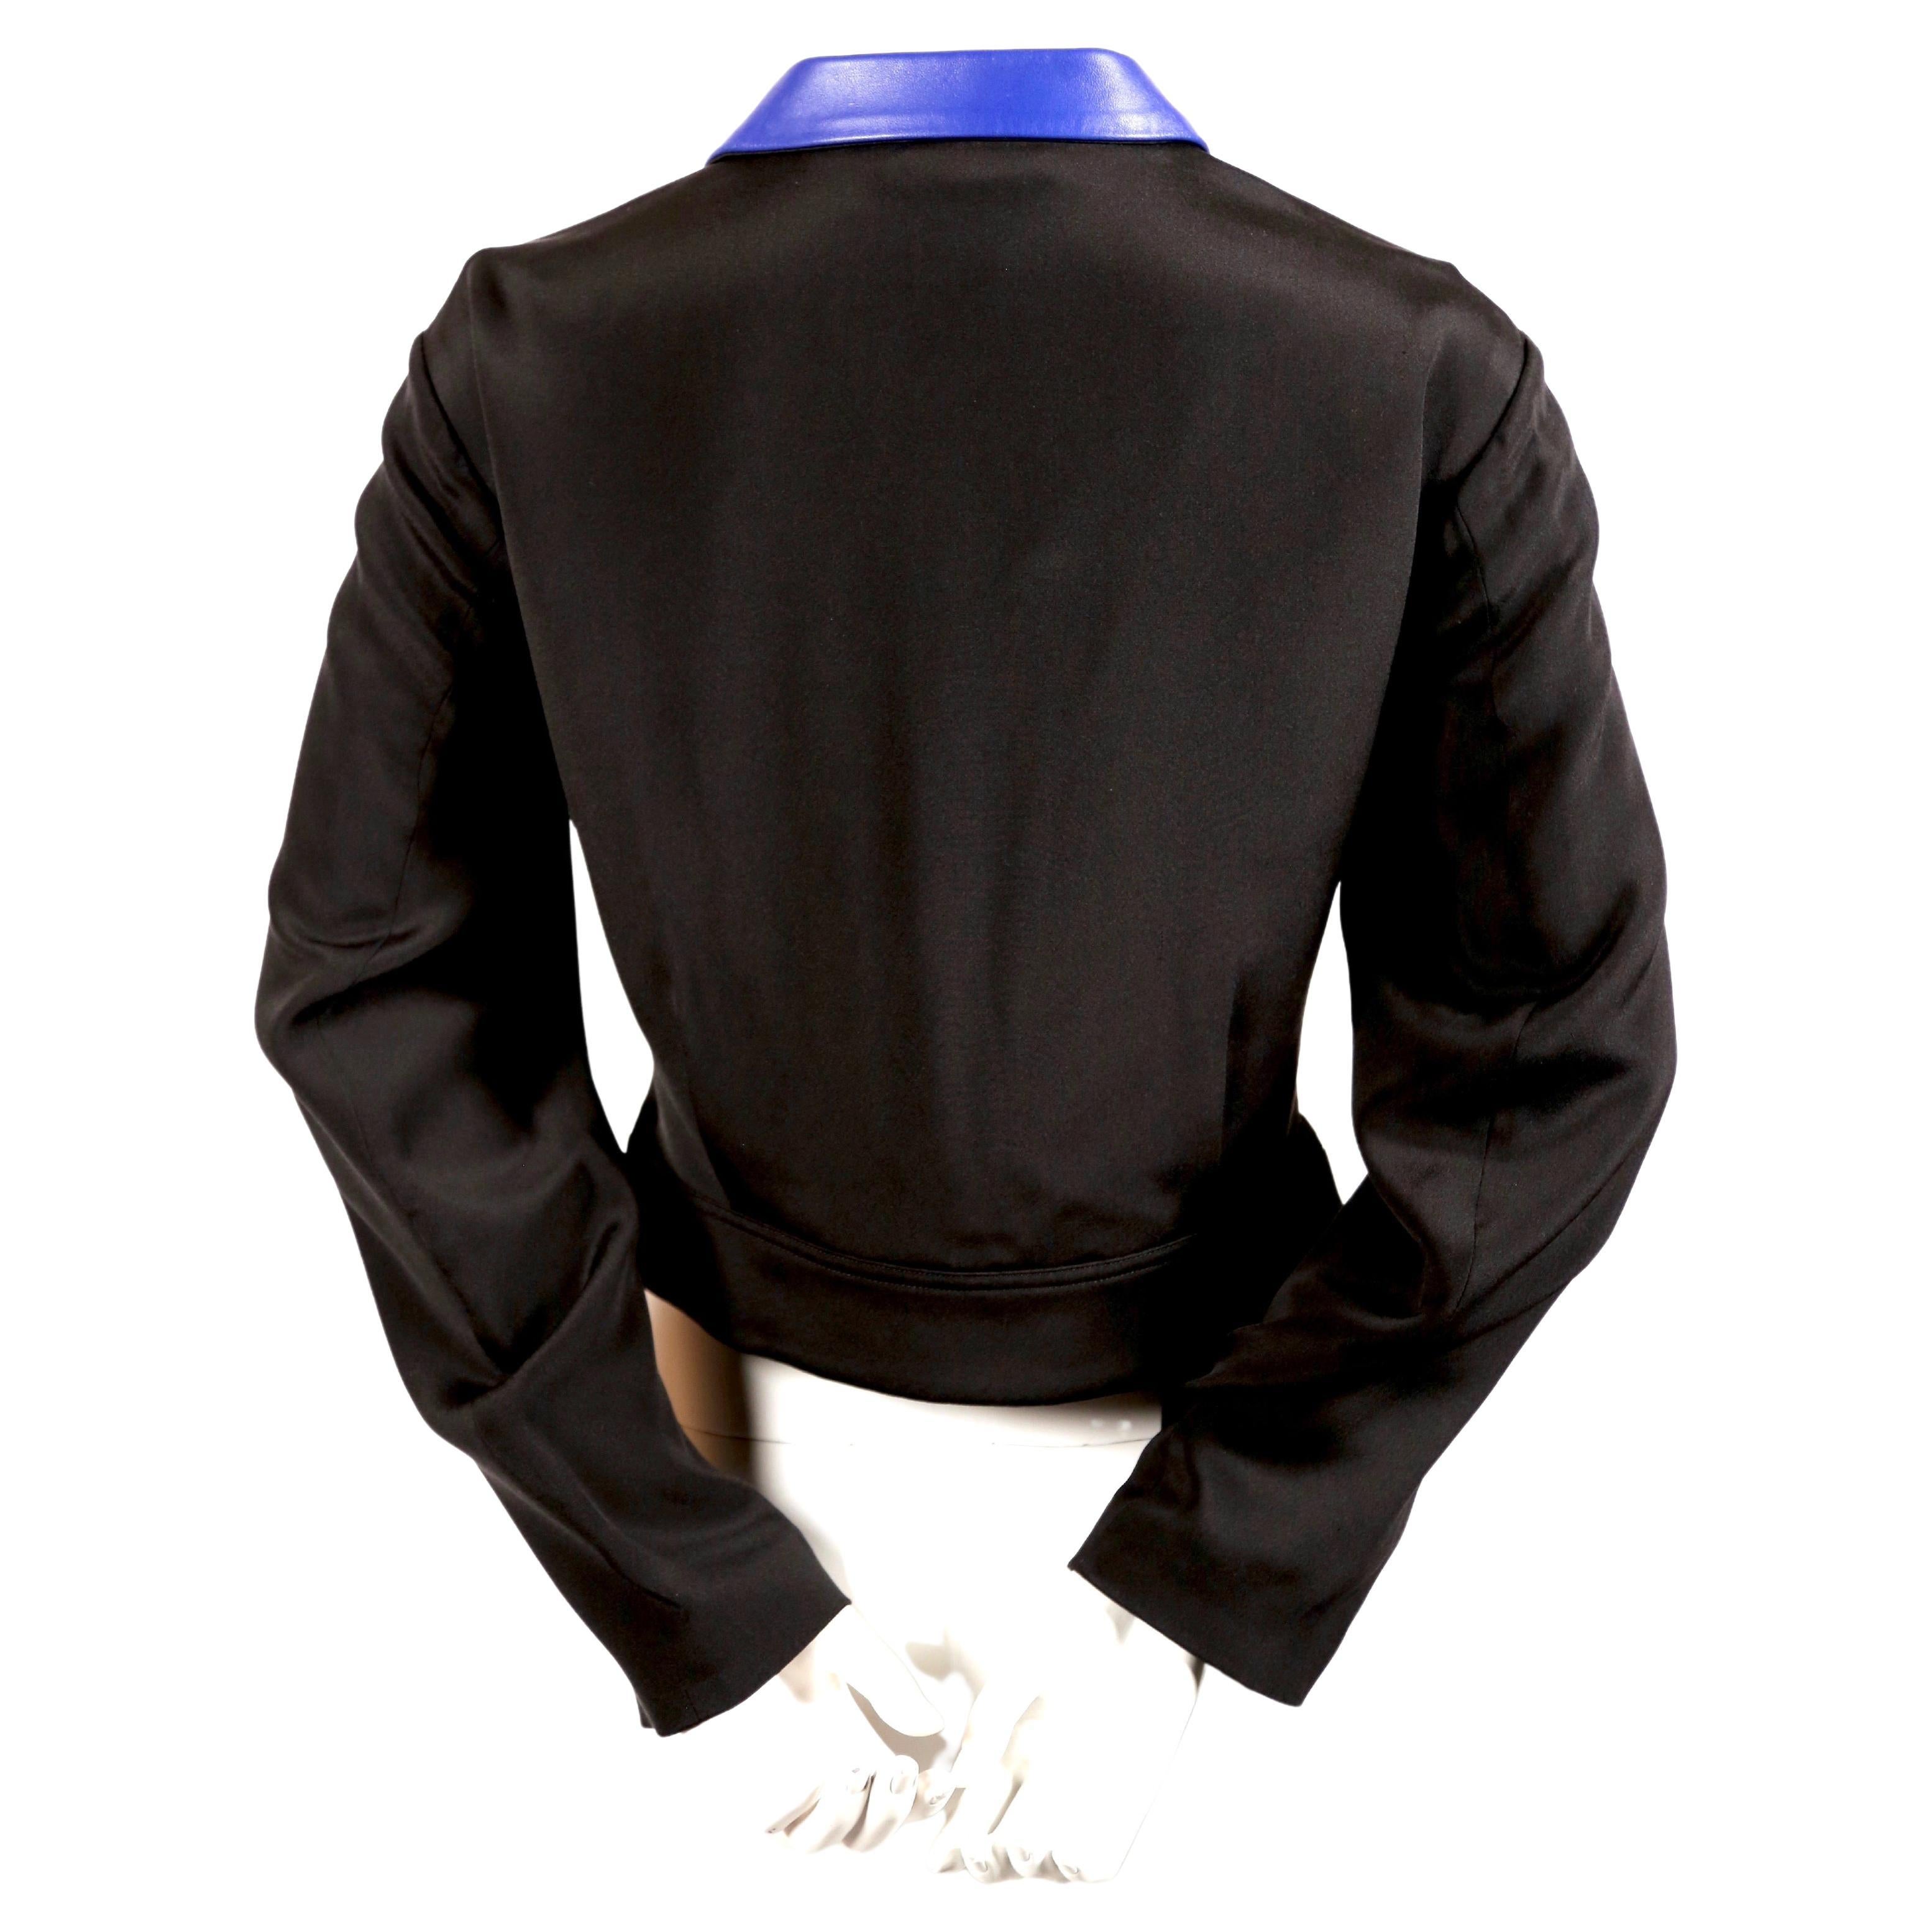 2007 YOHJI YAMAMOTO blue leather runway jacket with forced front - NEW with tags For Sale 3